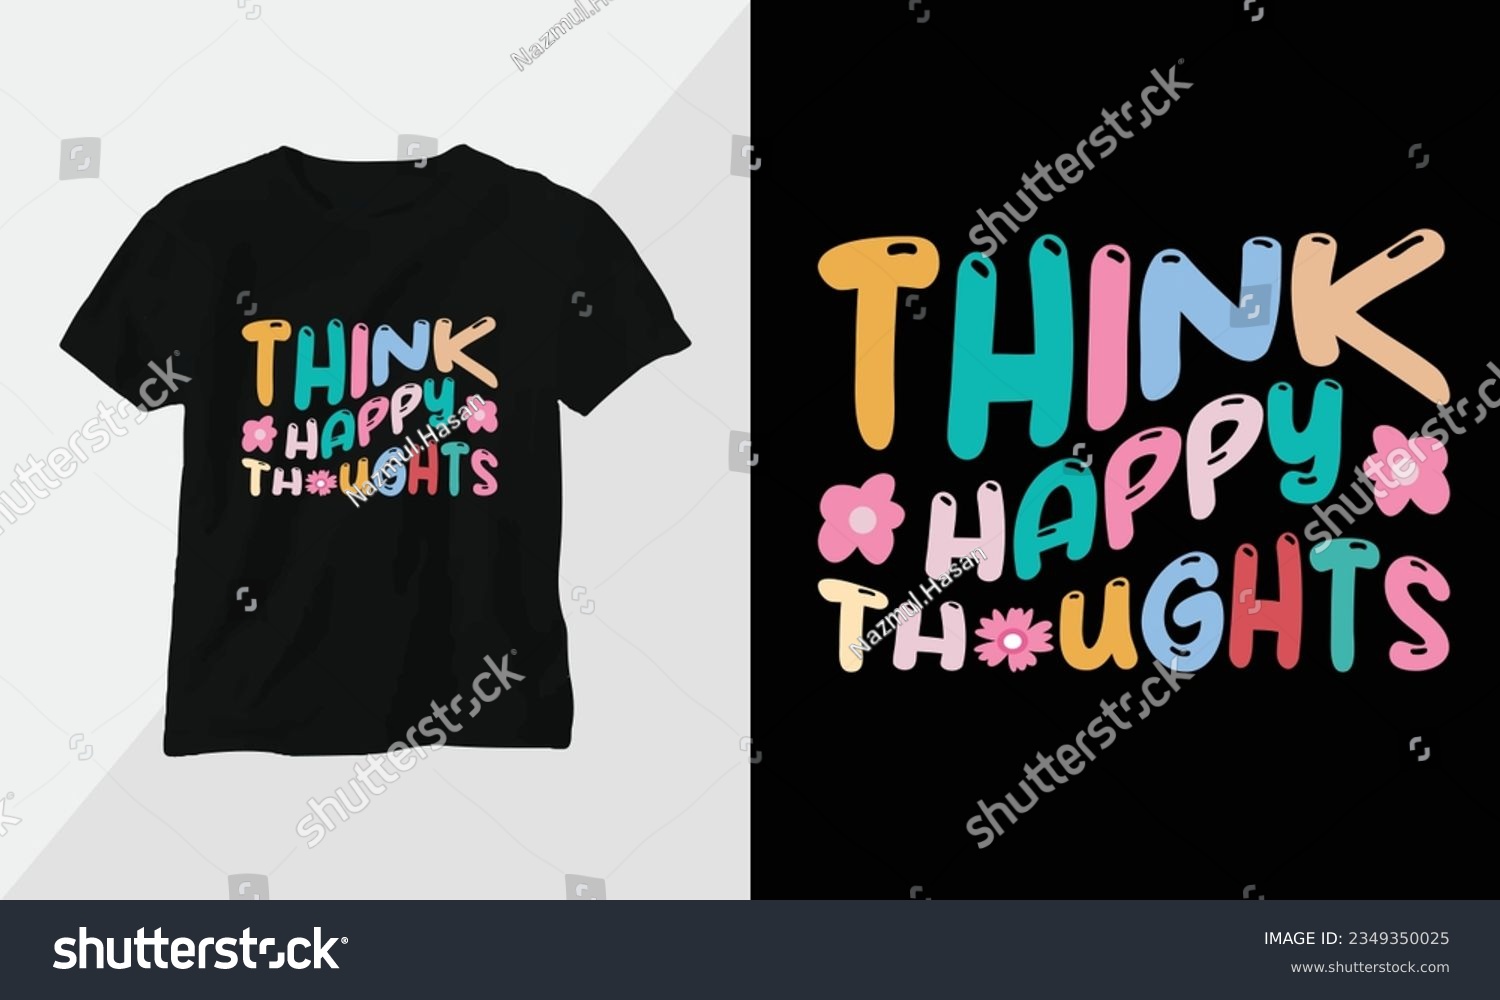 SVG of Retro Groovy Inspirational T-shirt Design with retro style svg